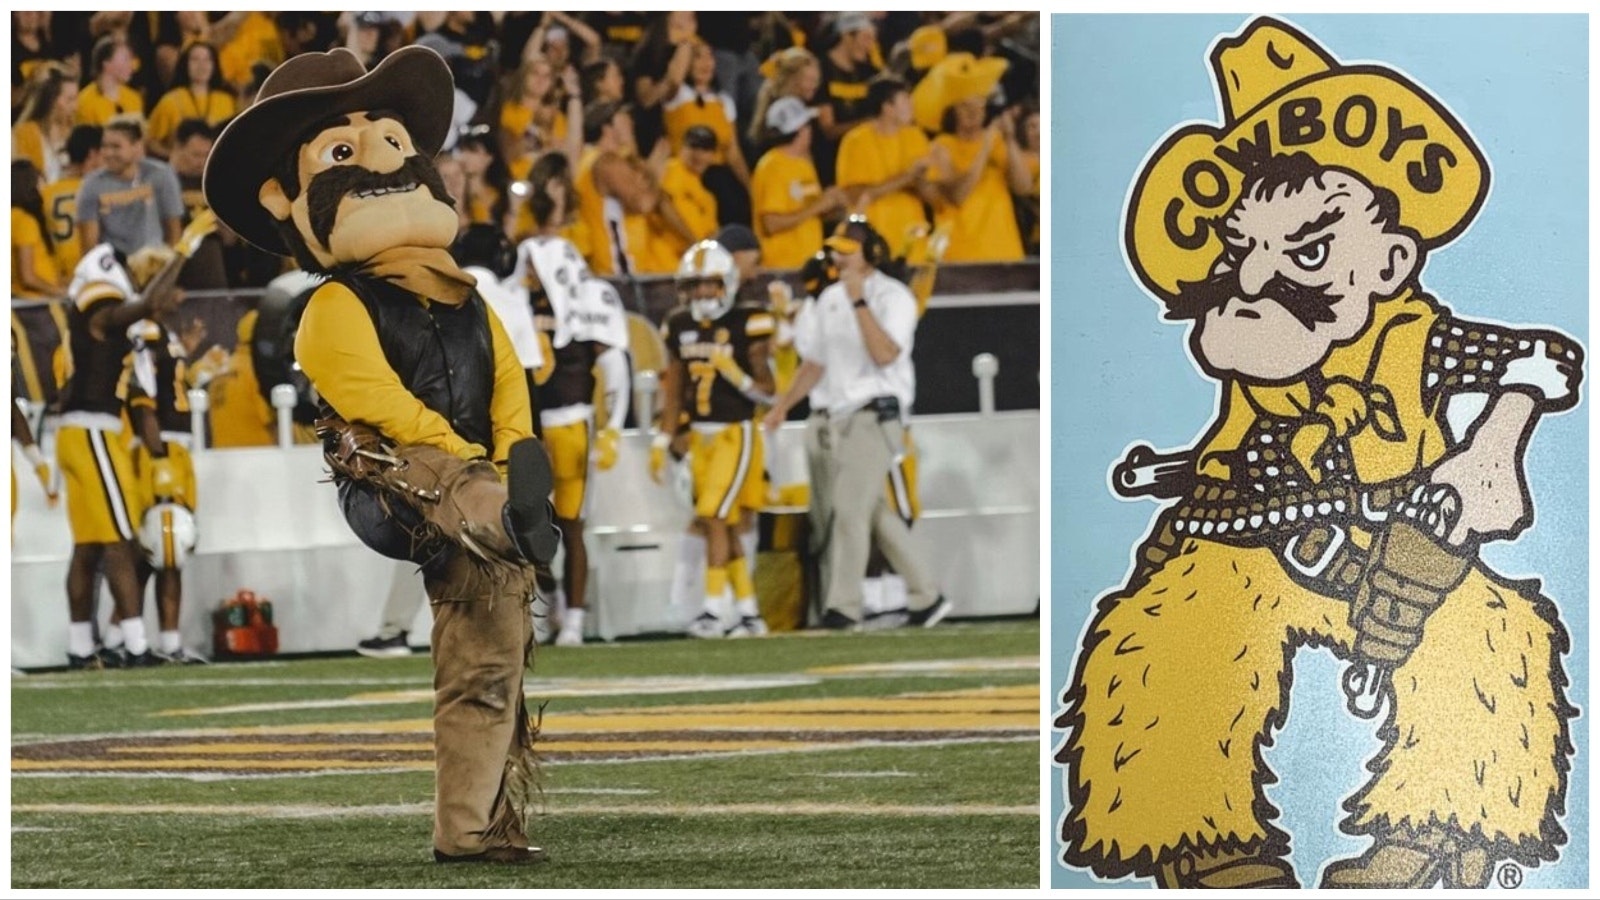 Pistol Pete performs at a football game, along with a tough-looking logo.